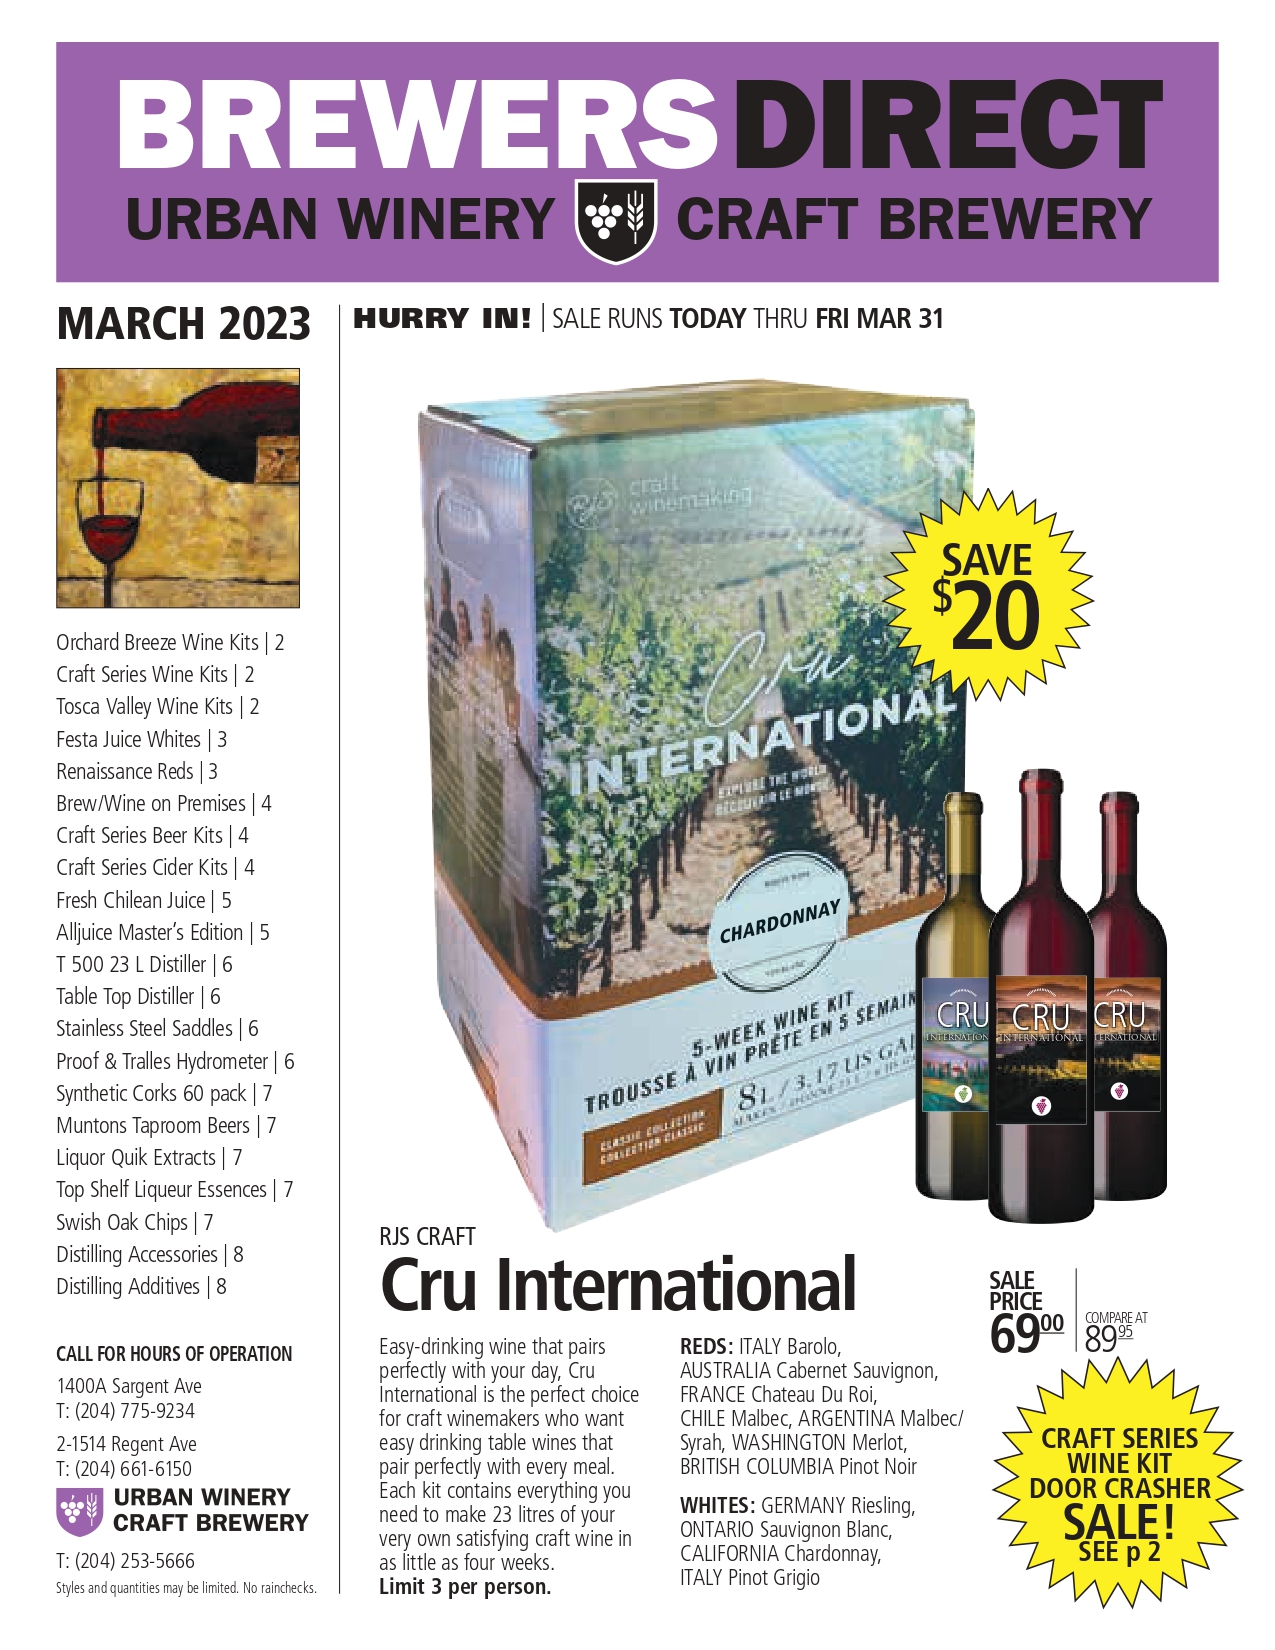 March 2023 Newsletter Brewers Direct